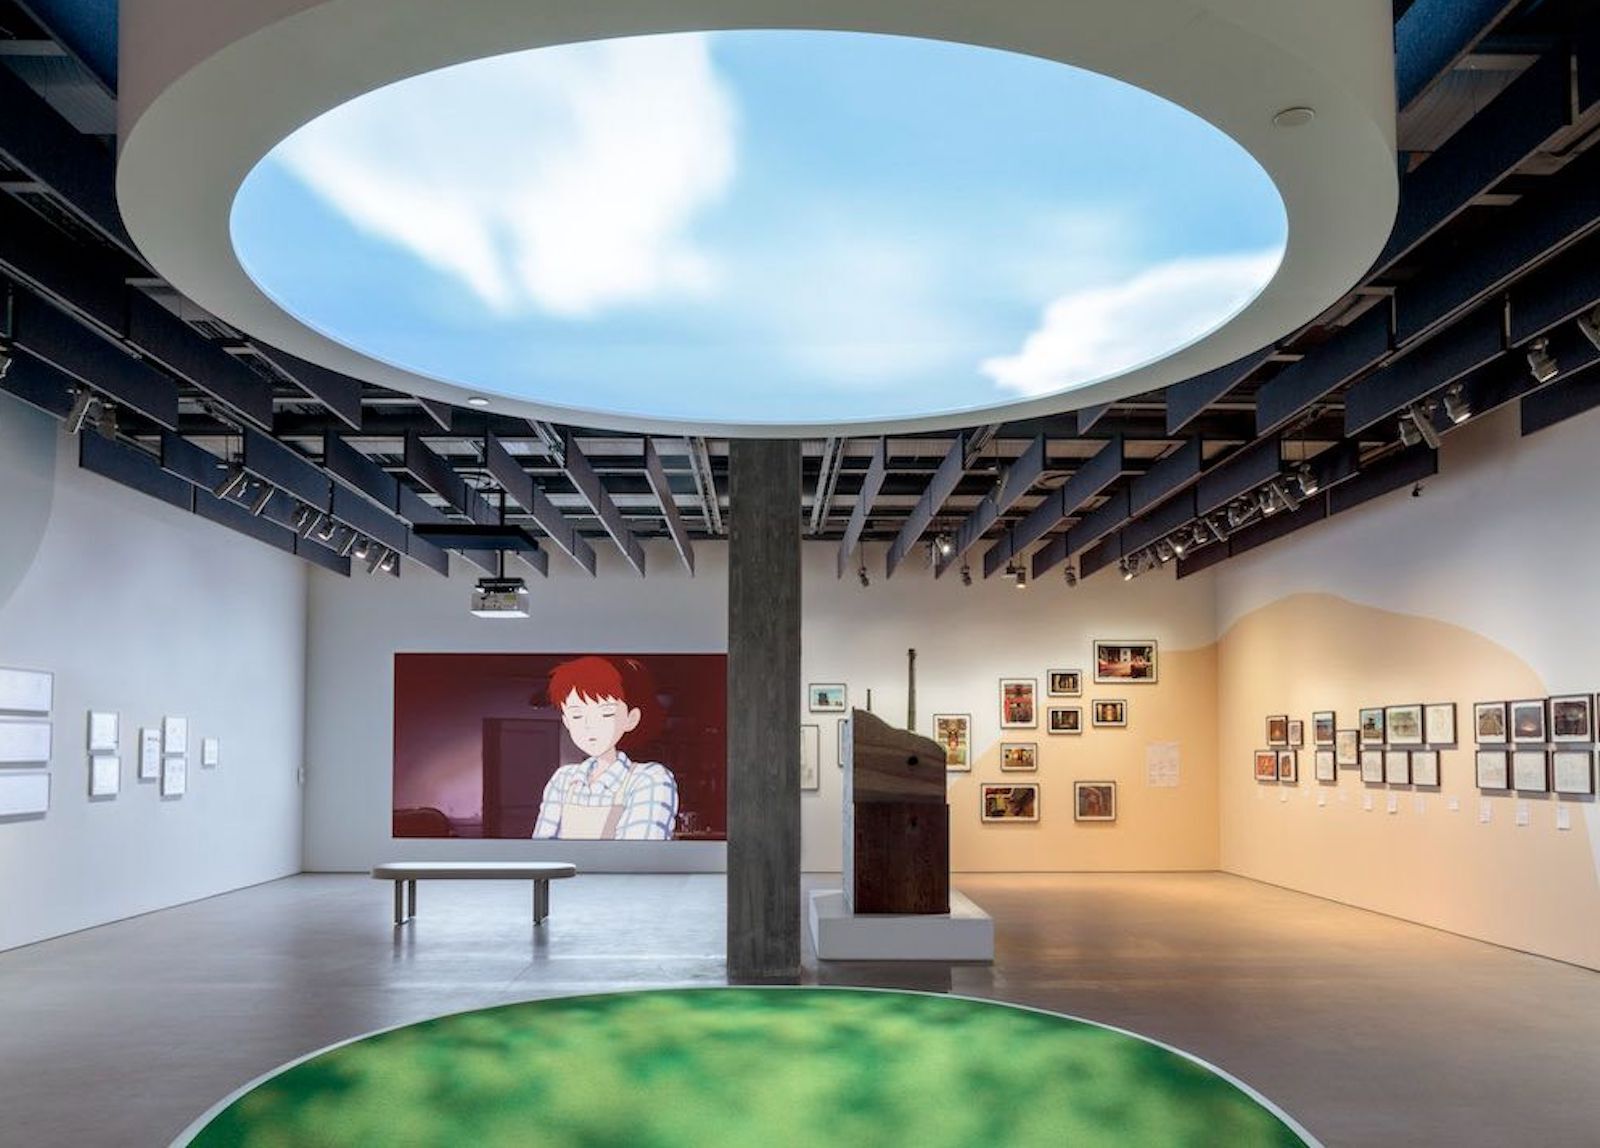 Explore the magical world of Hayao Miyazaki in the Academy Museum's new  exhibition